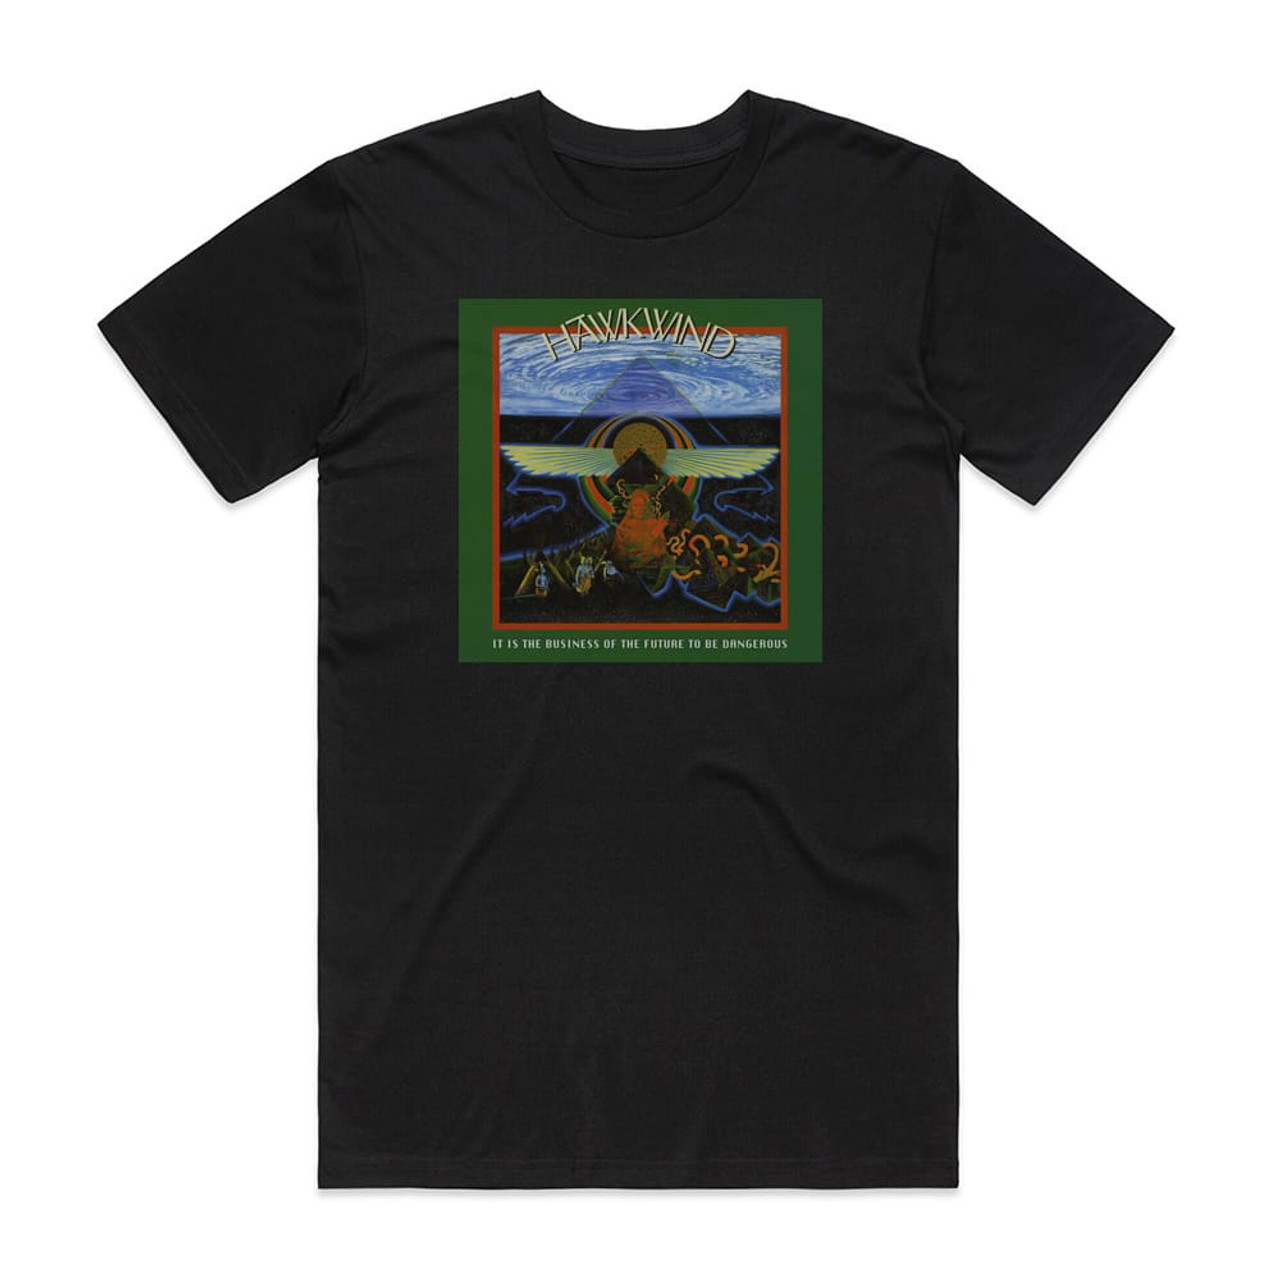 Hawkwind It Is The Business Of The Future To Be Dangerous Album Cover  T-Shirt Black